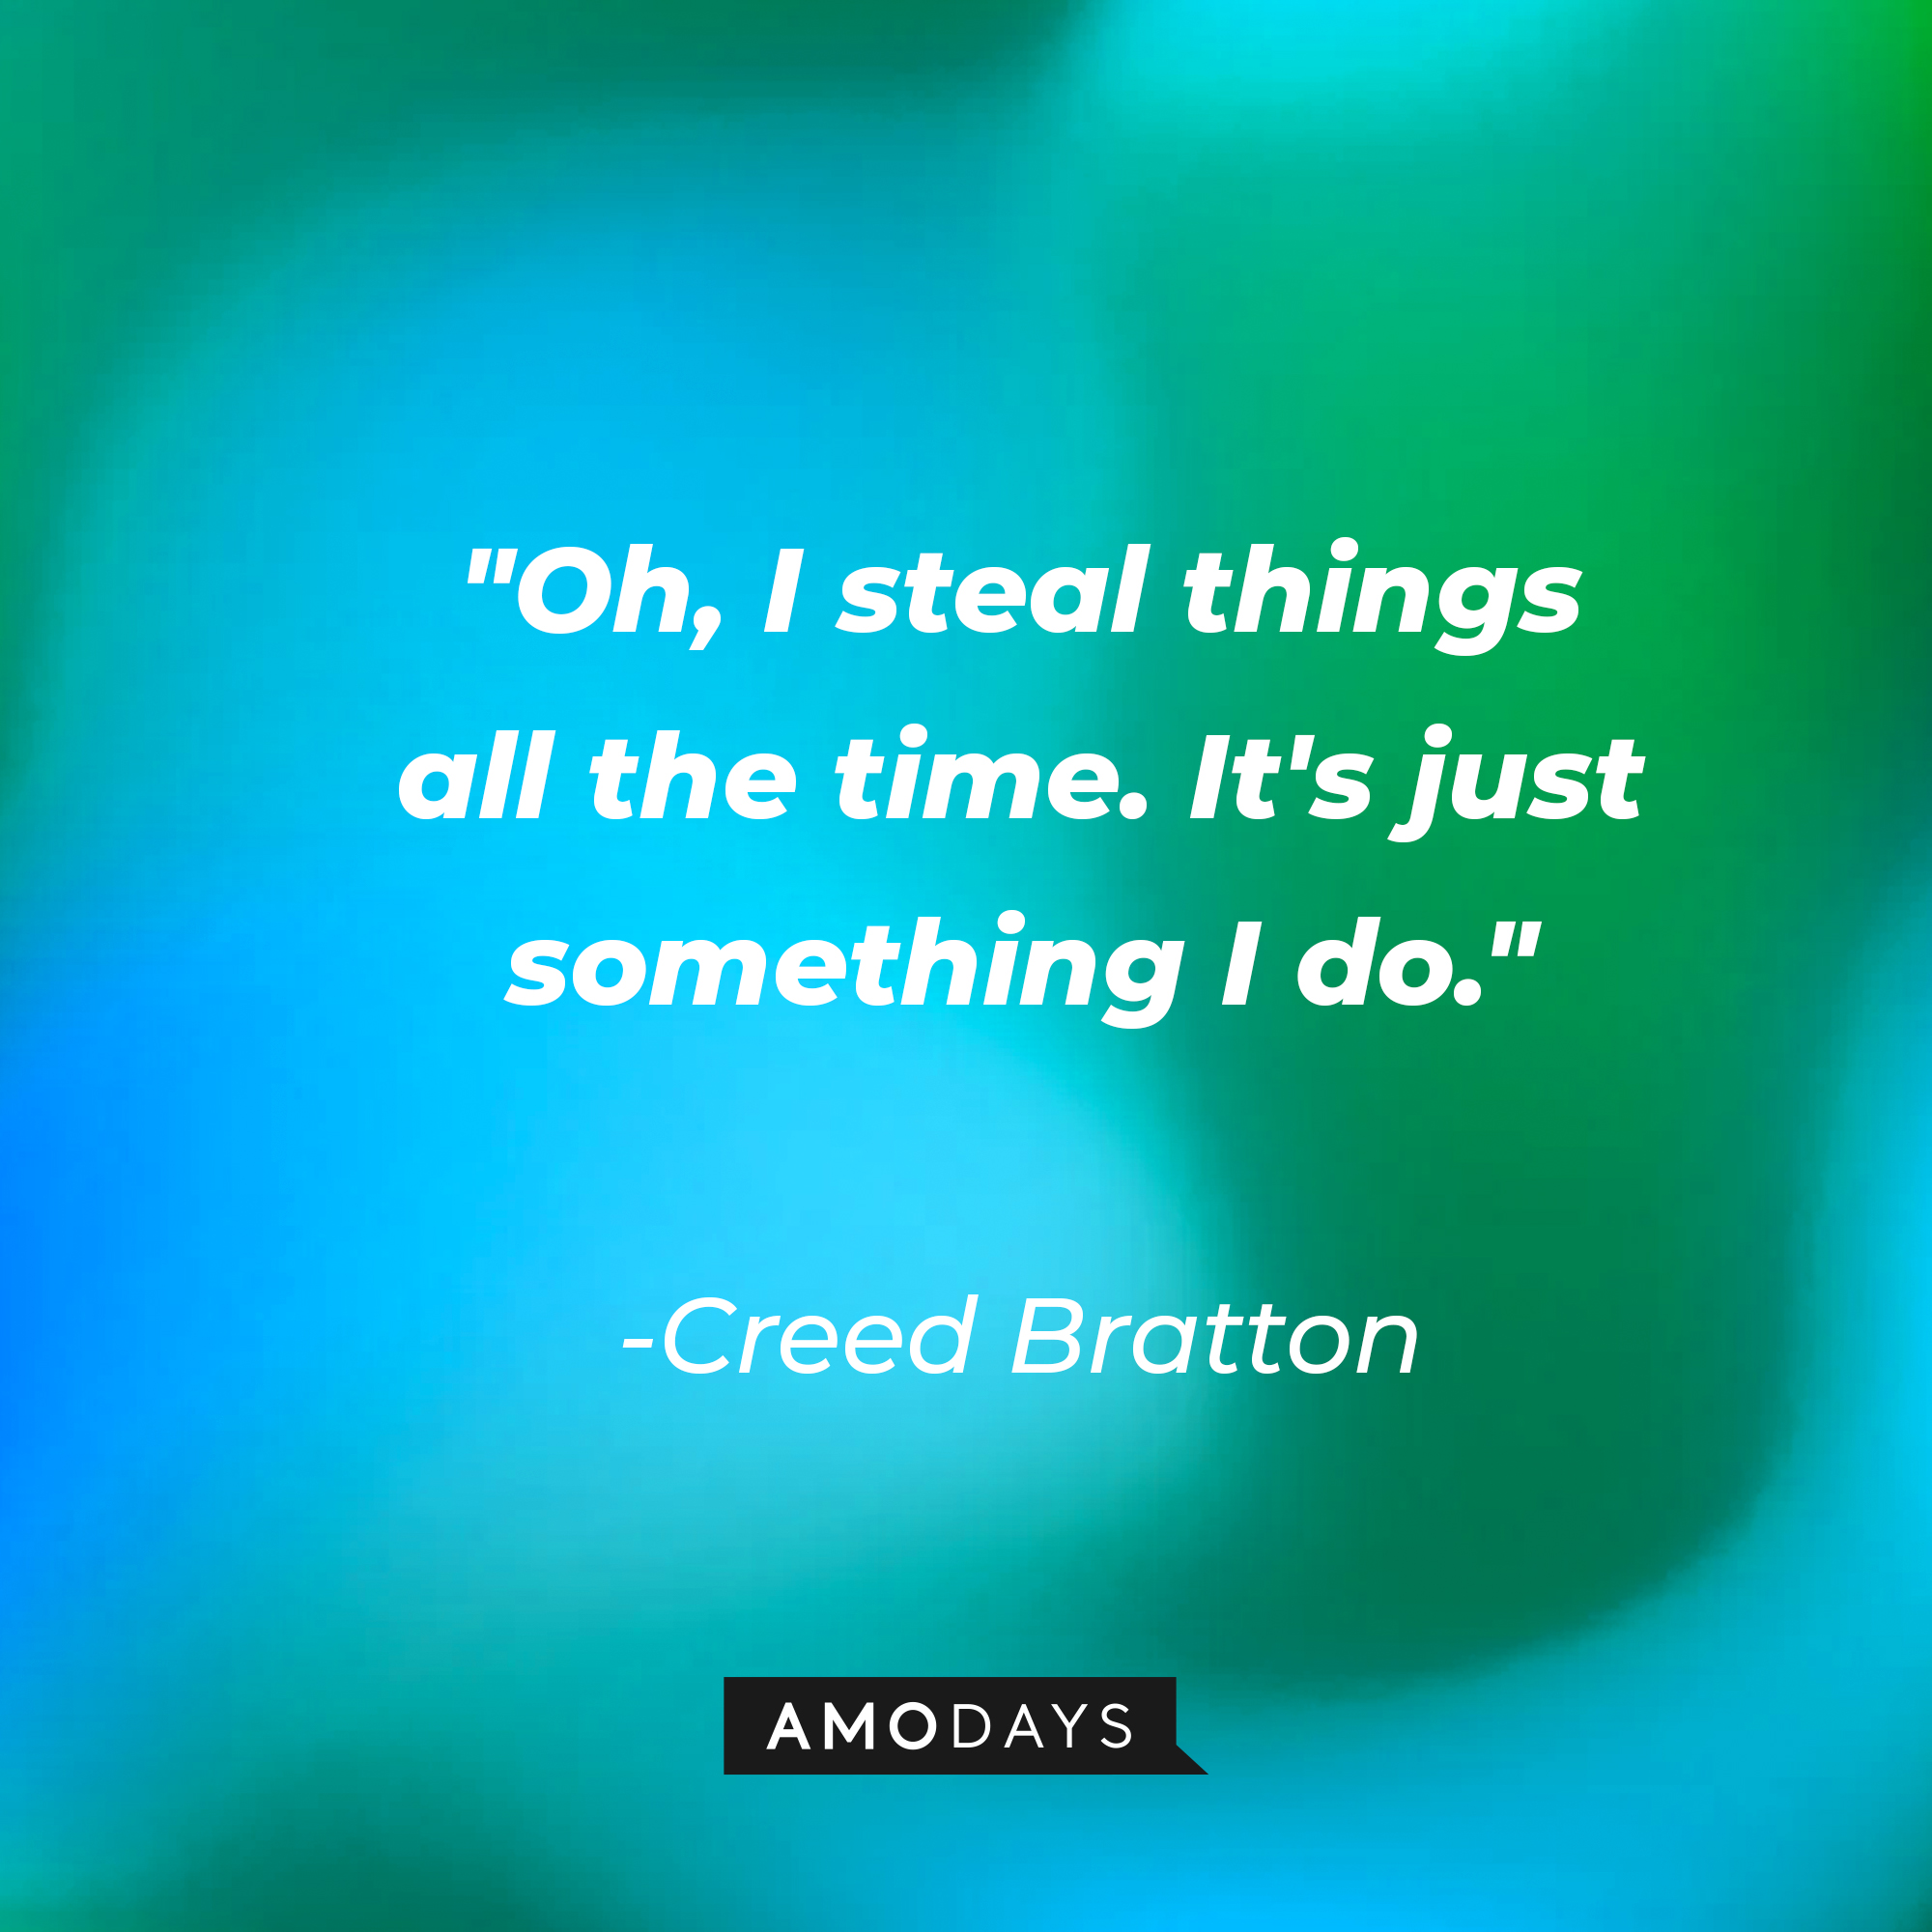 Creed Bratton's quote: "Oh, I steal things all the time. It's just something I do." | Source: AmoDays